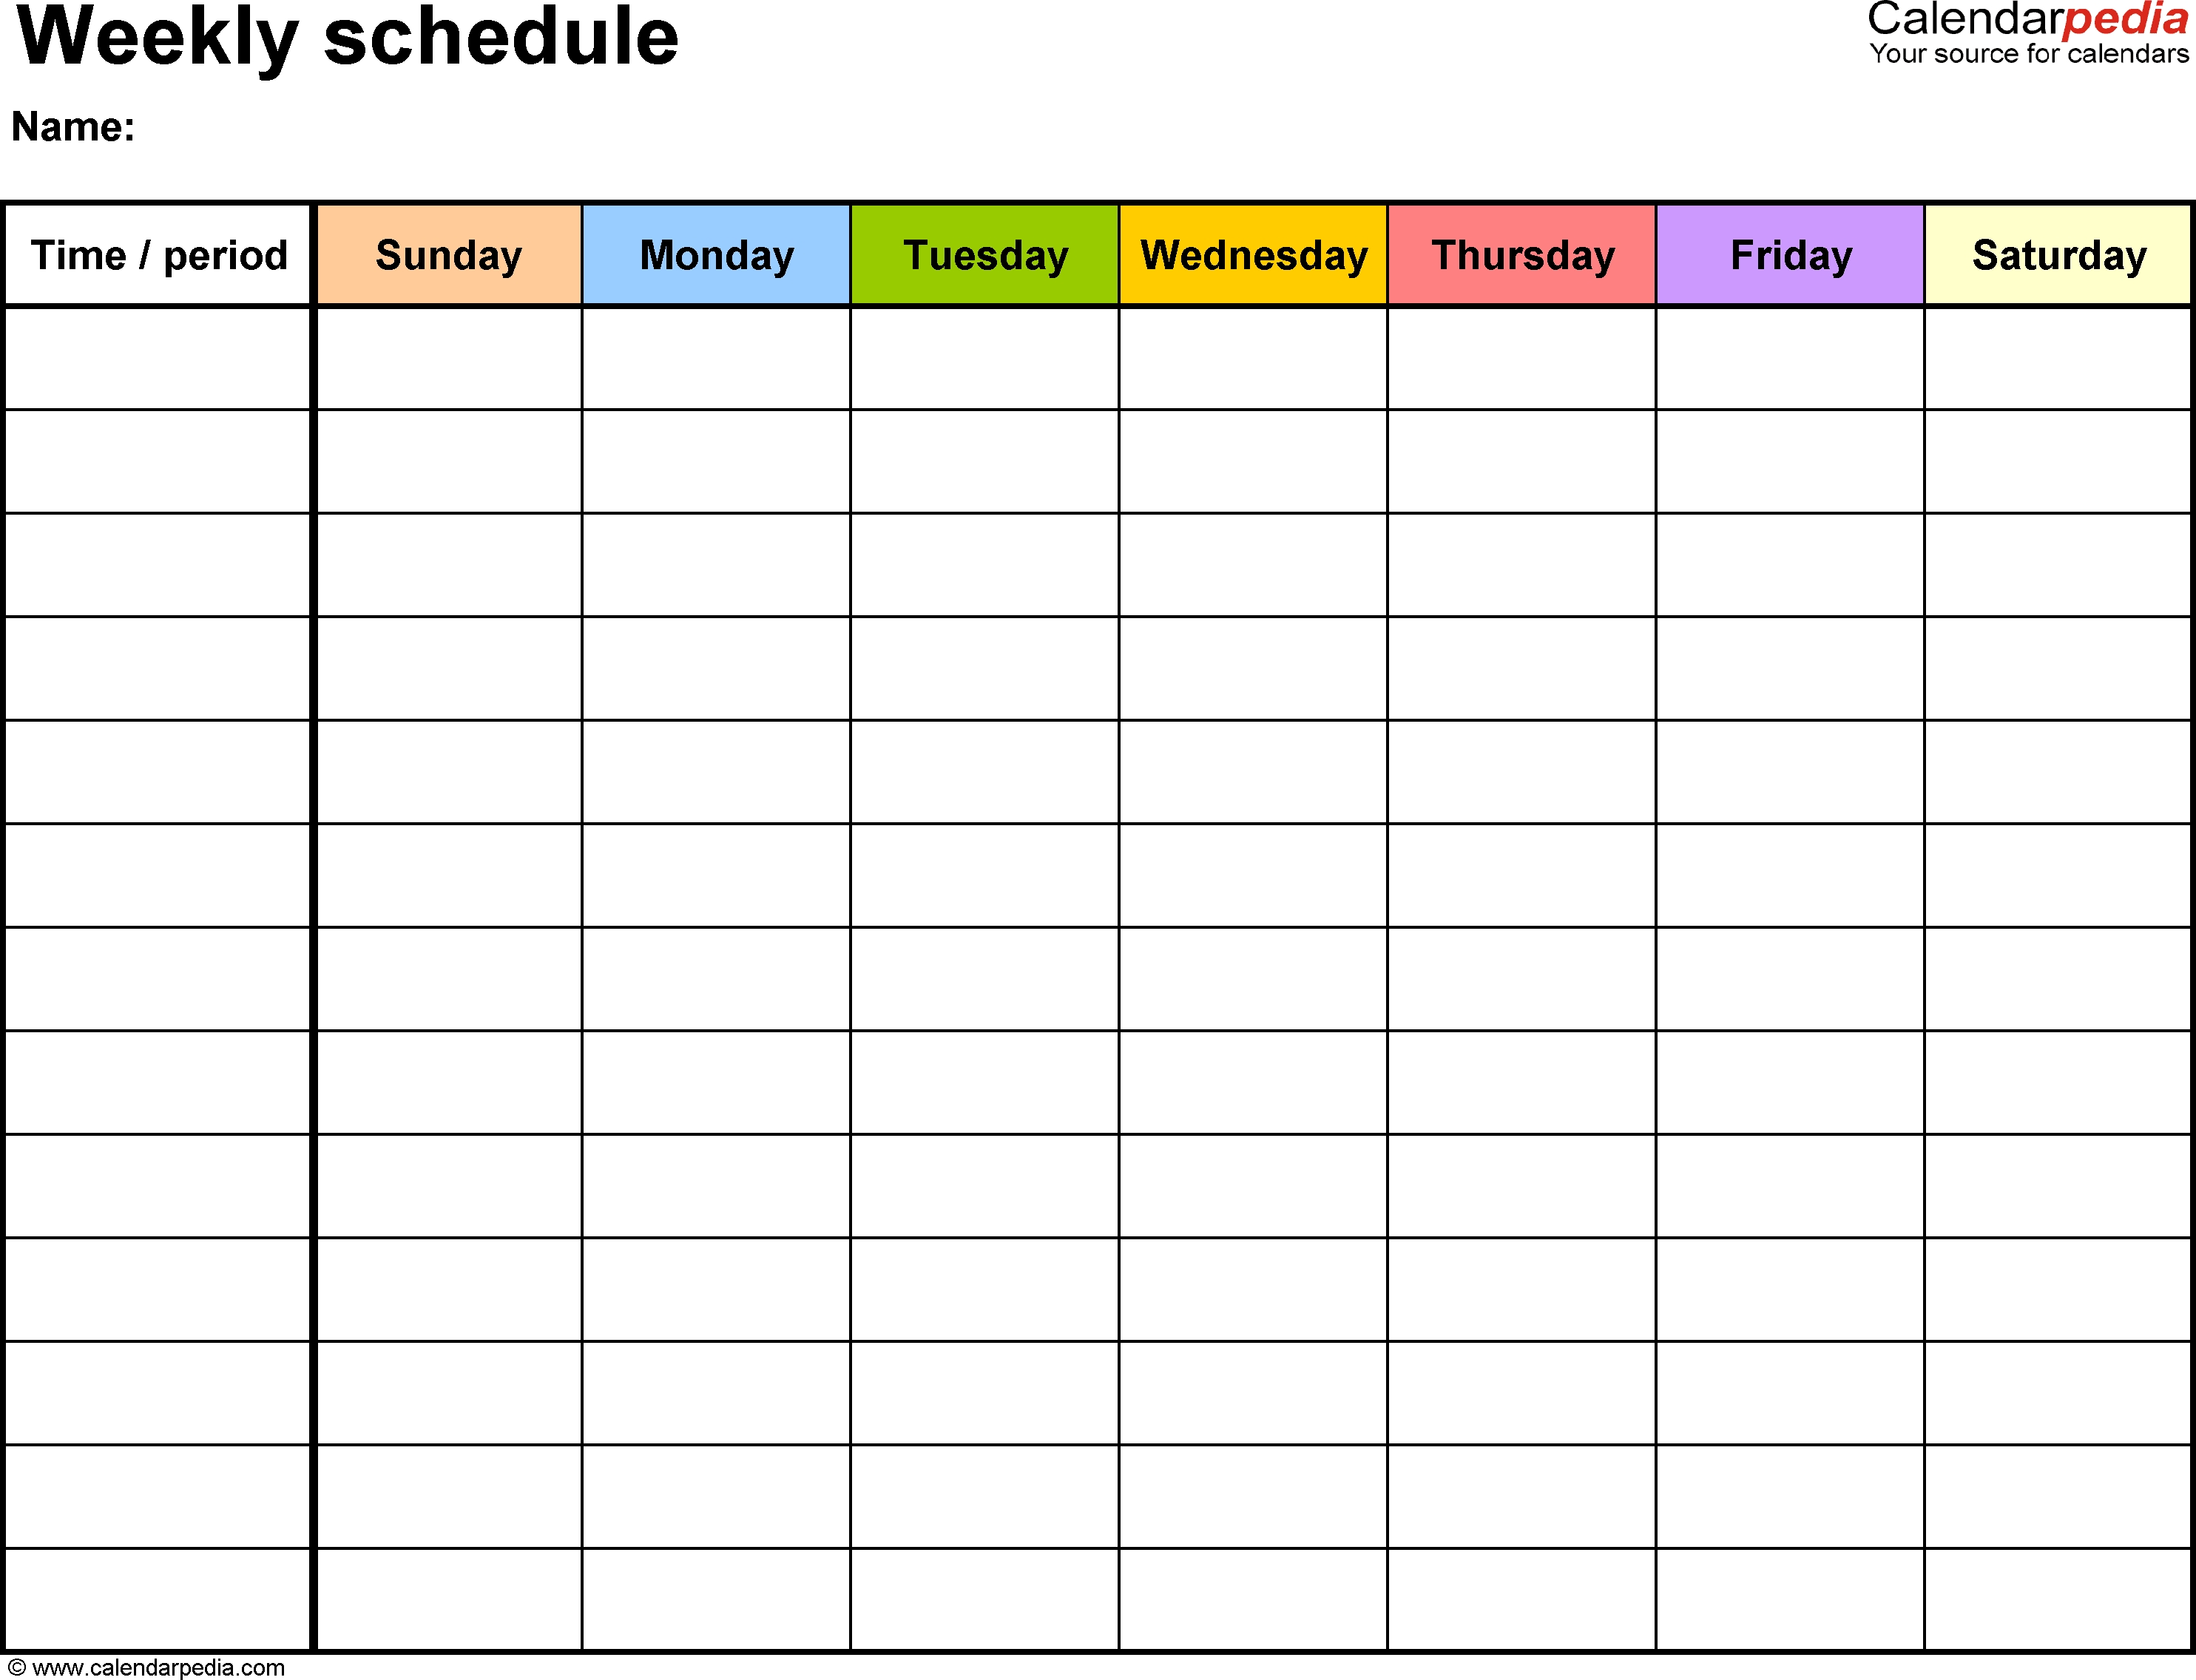 Free Weekly Schedule Templates For Excel - 18 Templates with regard to Excel Calendar By Day For Planning